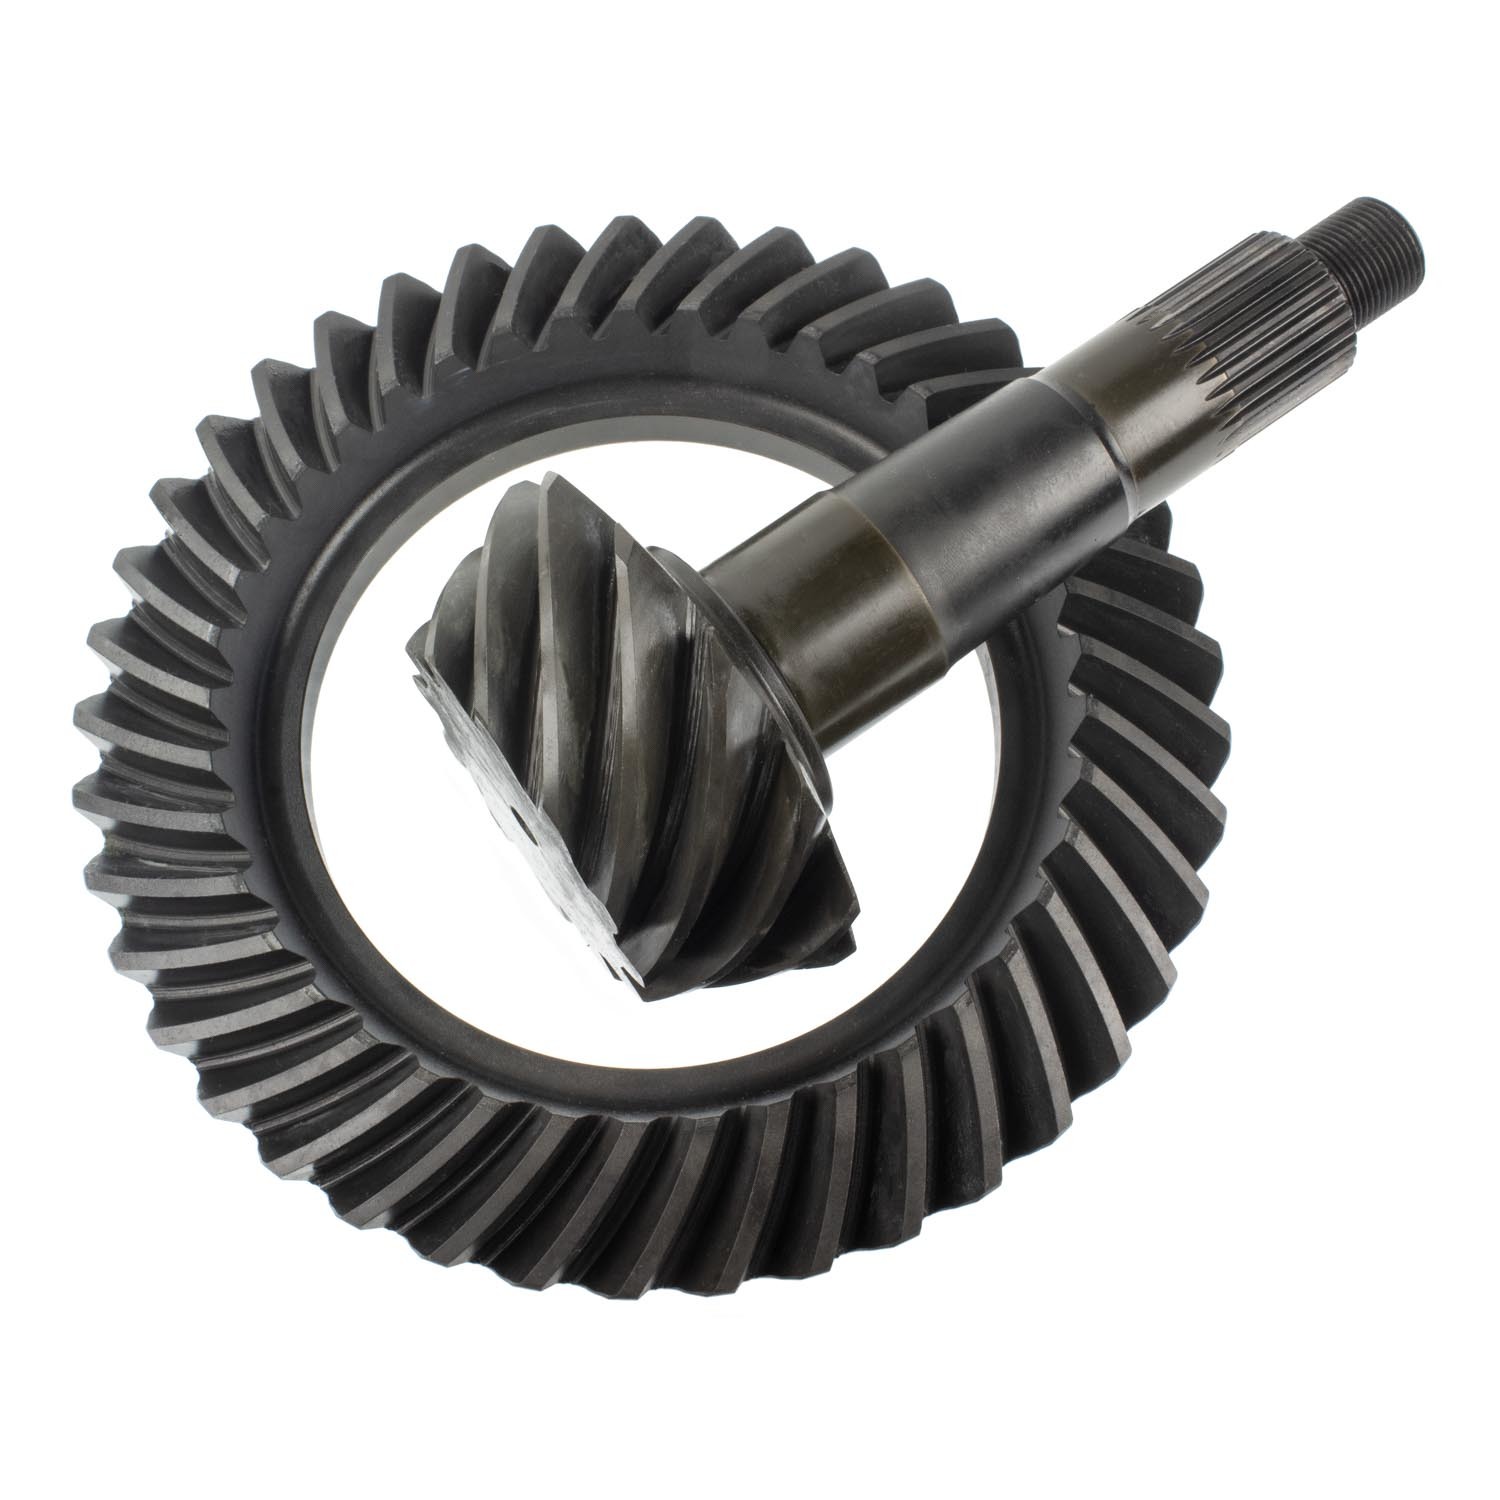 Richmond Gear 12BC342 Ring and Pinion, Excel, 3.42 Ratio, 30 Spline Pinion, 3 Series, 8.875 in, GM 12-Bolt, Kit